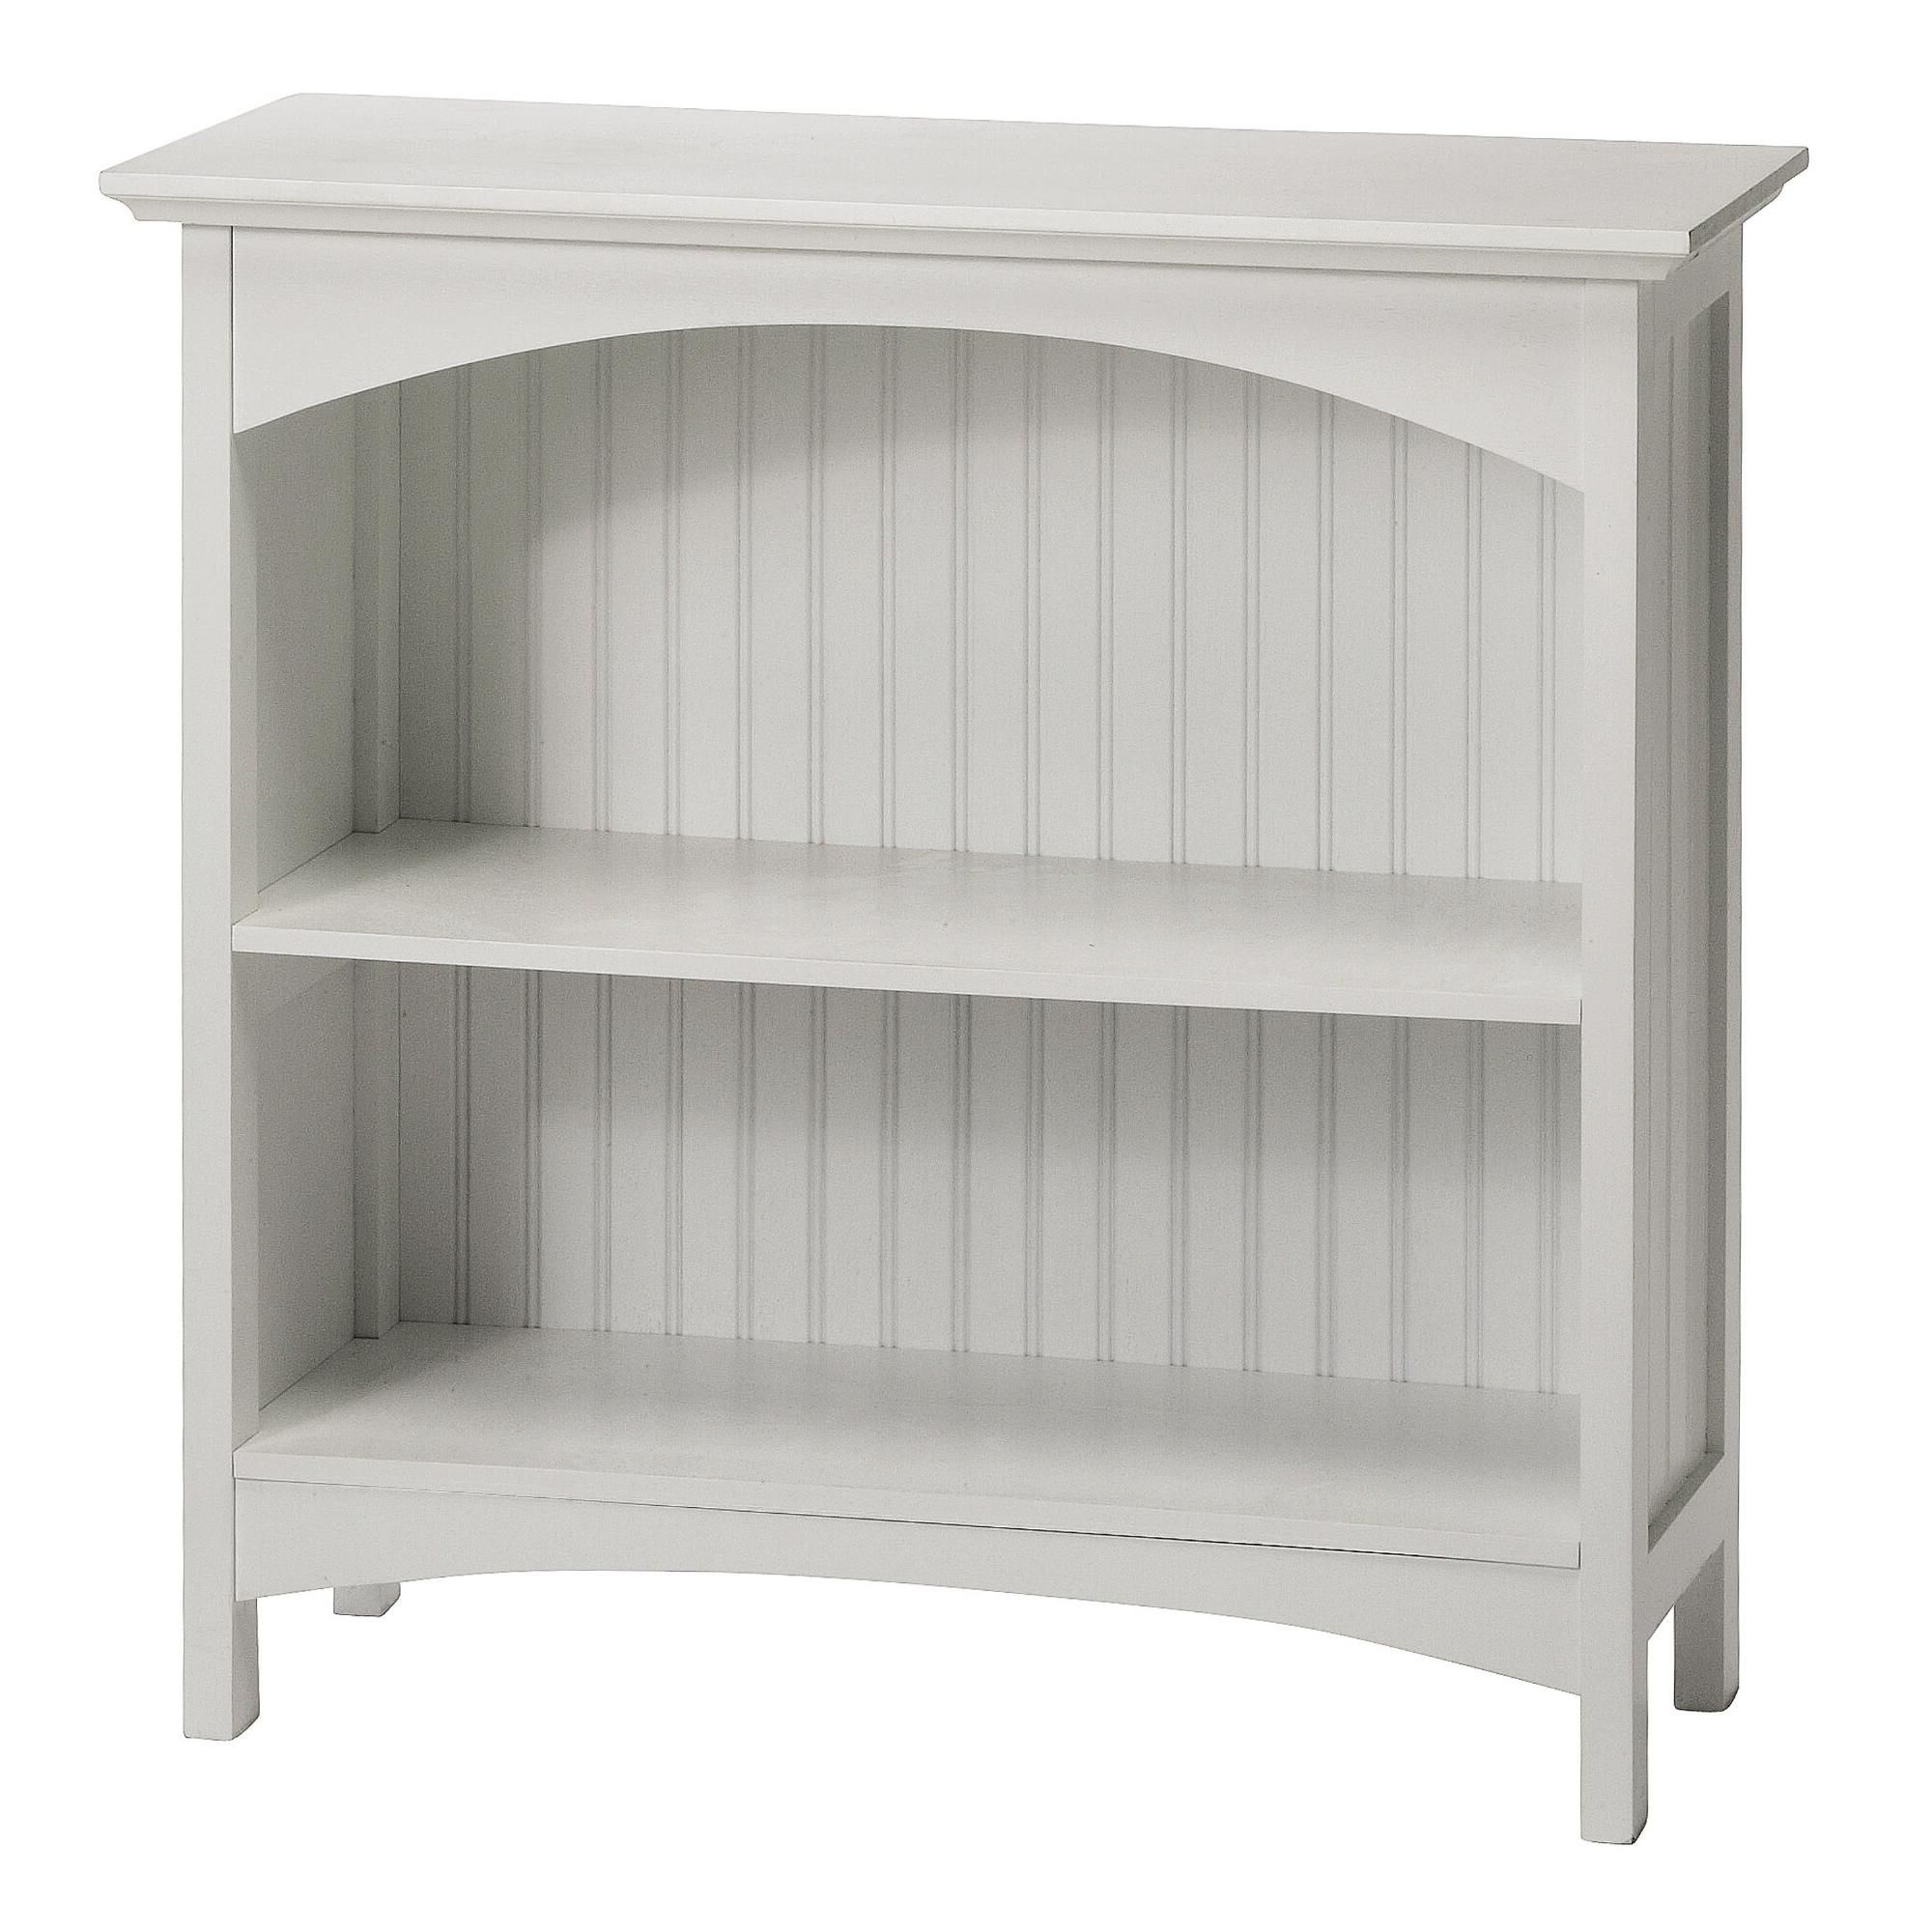 Latest 2 Shelf Bookcases Pertaining To 2 Shelf Bookcase White (View 15 of 15)